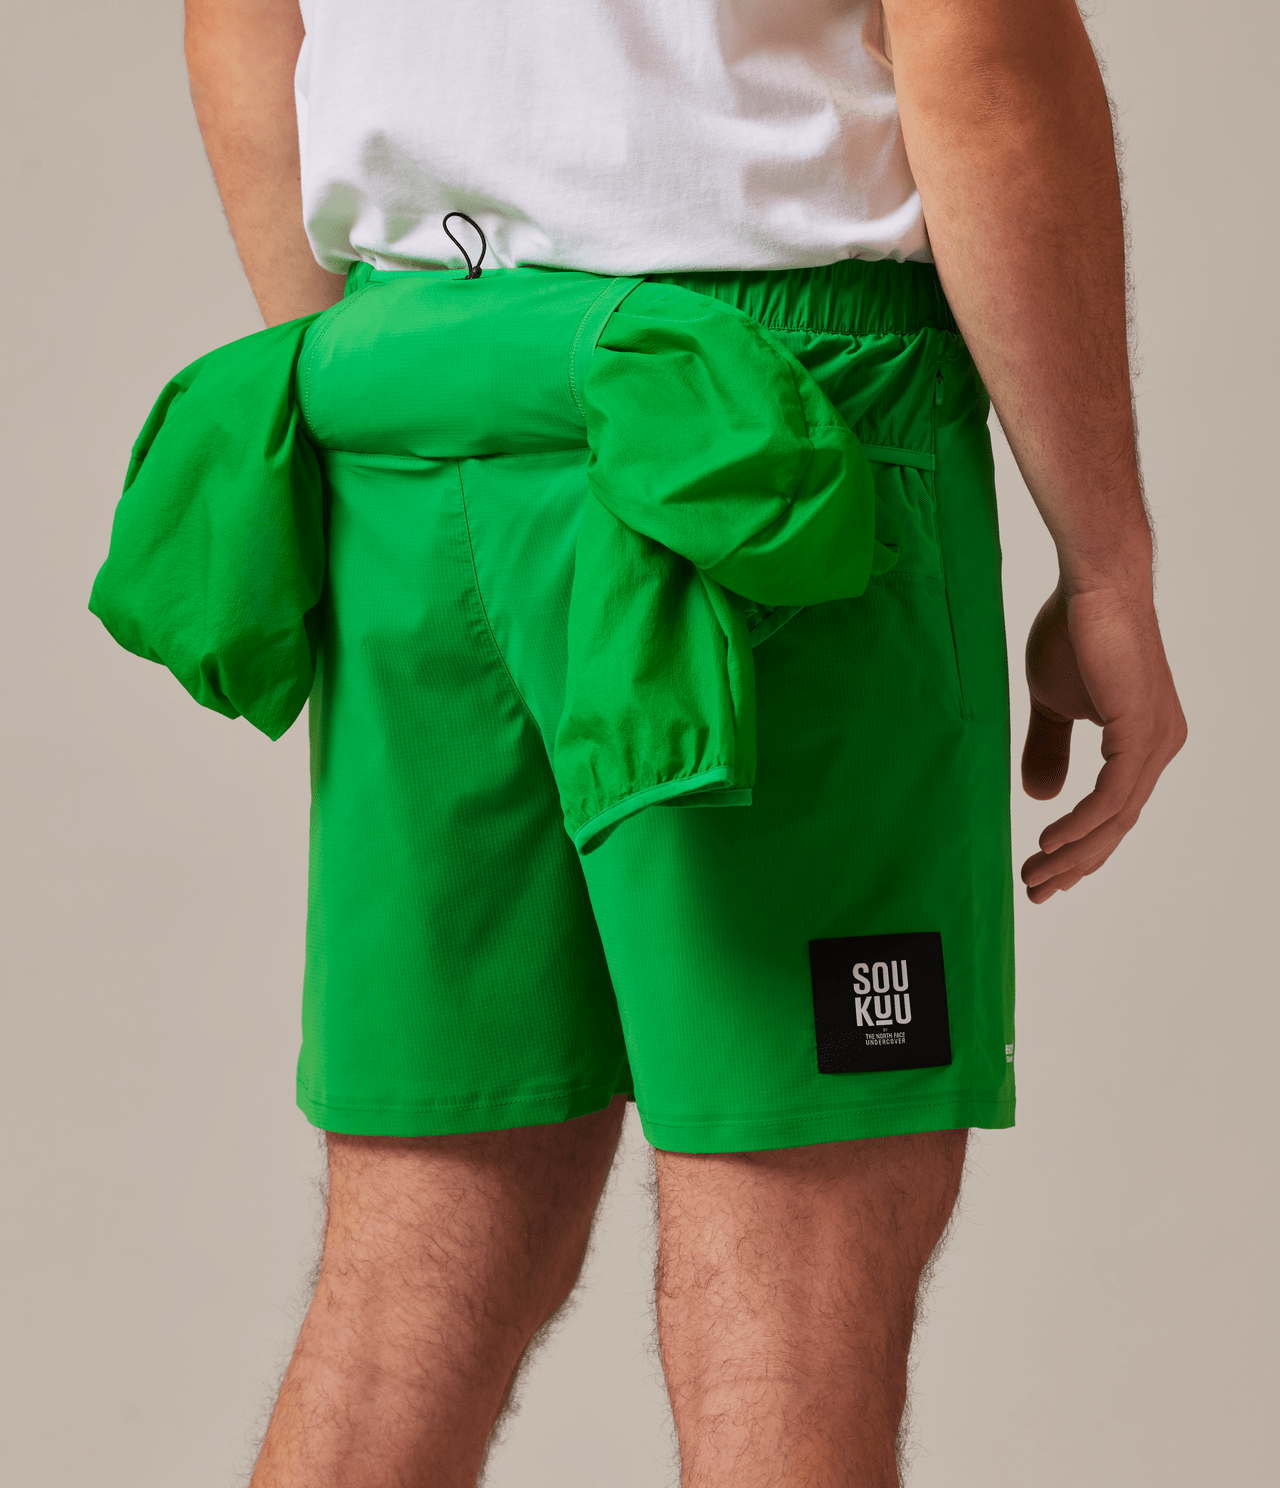 THE NORTH FACE ザ・ノース・フェイス UNDERCOVER アンダーカバー コラボ　THE NORTH FACE × UNDERCOVER Trail Run Utility 2-in-1 Shorts (ザ・ノース・フェイス x アンダーカバー トレイルラン・ユーティリティ・2-in-1 ショーツ)グリーン１